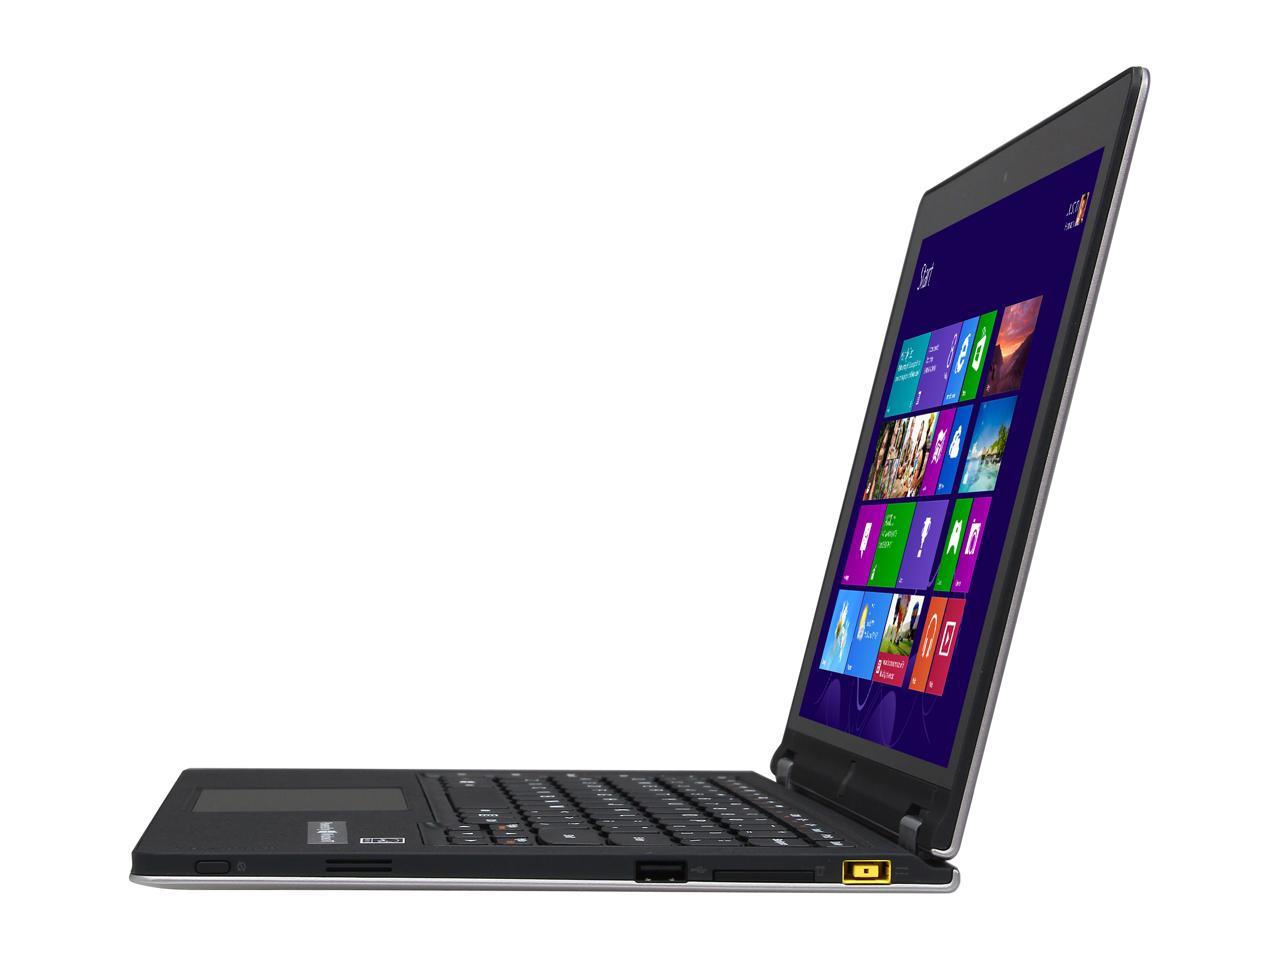 PC/タブレット ノートPC Lenovo Laptop NVIDIA Tegra 3 up to 1.4 GHz single core/1.3GHz quad 